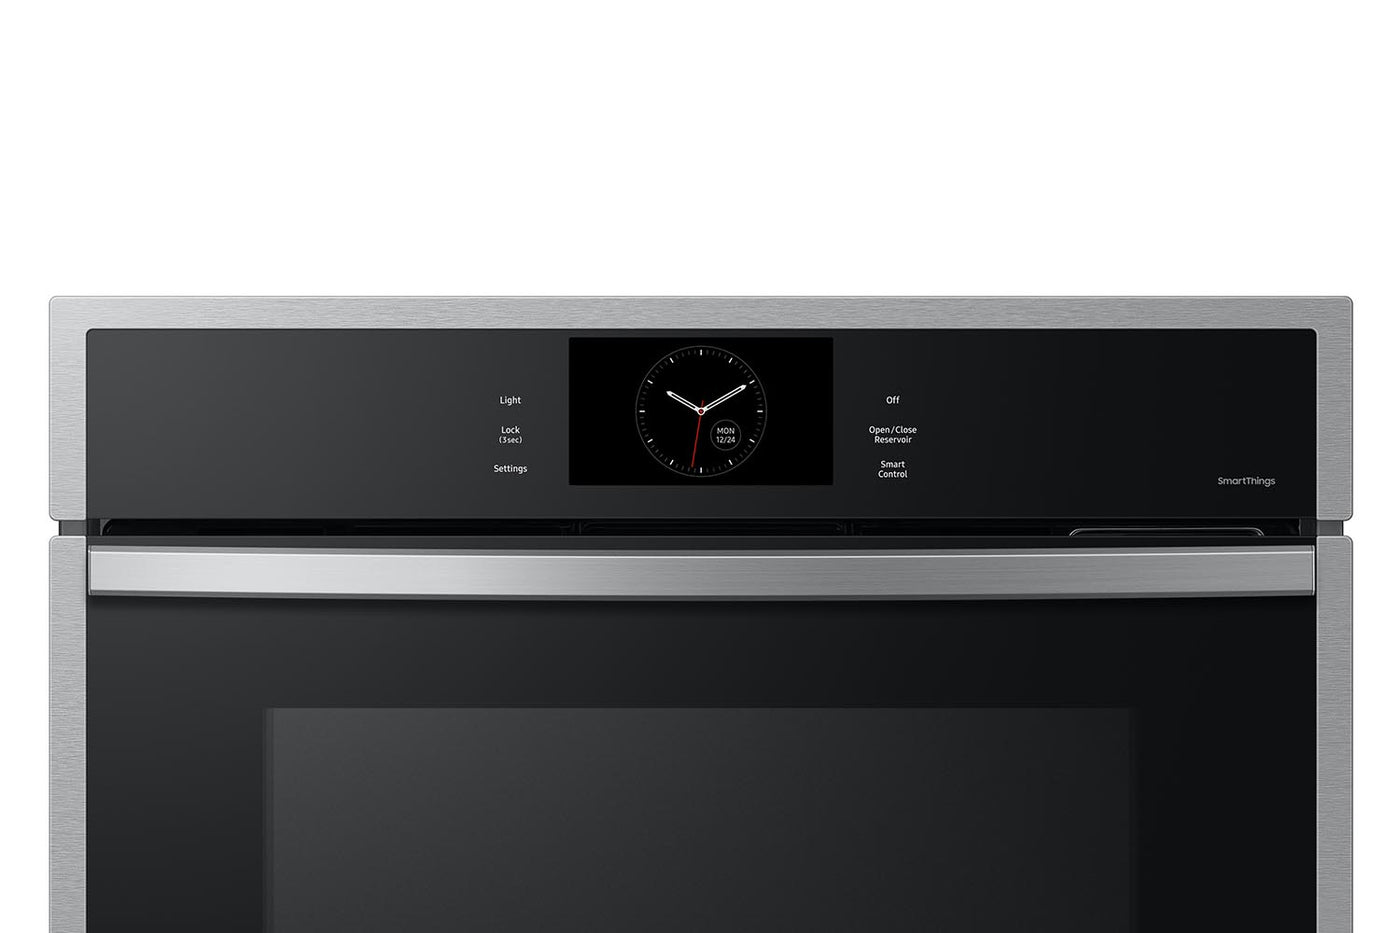 Samsung Stainless Steel Wall Oven (5.1 cu. ft) - NV51CG600SSRAA